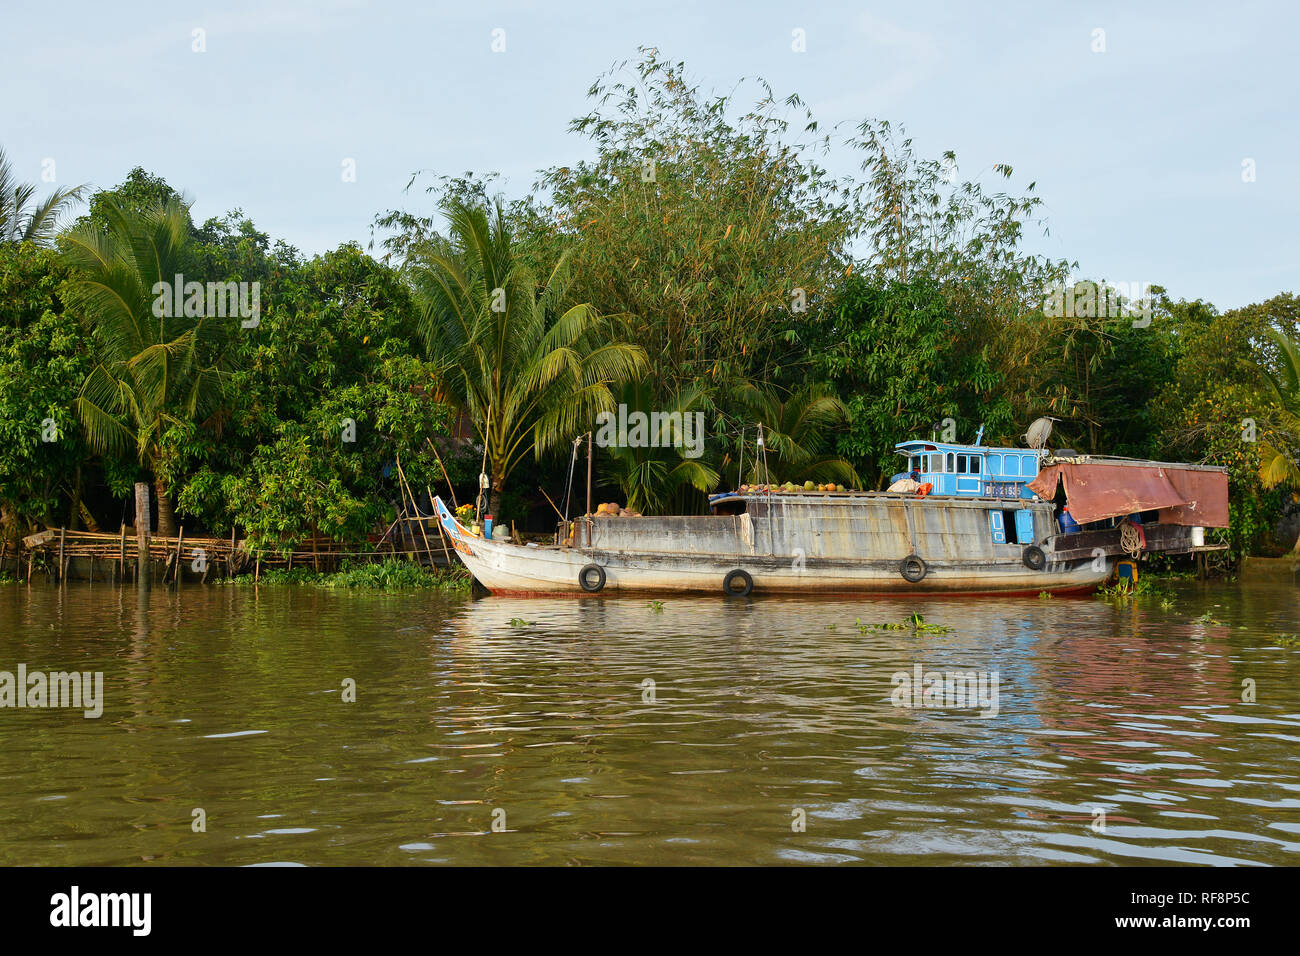 Can Tho, Vietnam - December 31st 2017. An old wooden full of vegetables is moored outside a house in the Mekong Delta following the morning's floating Stock Photo